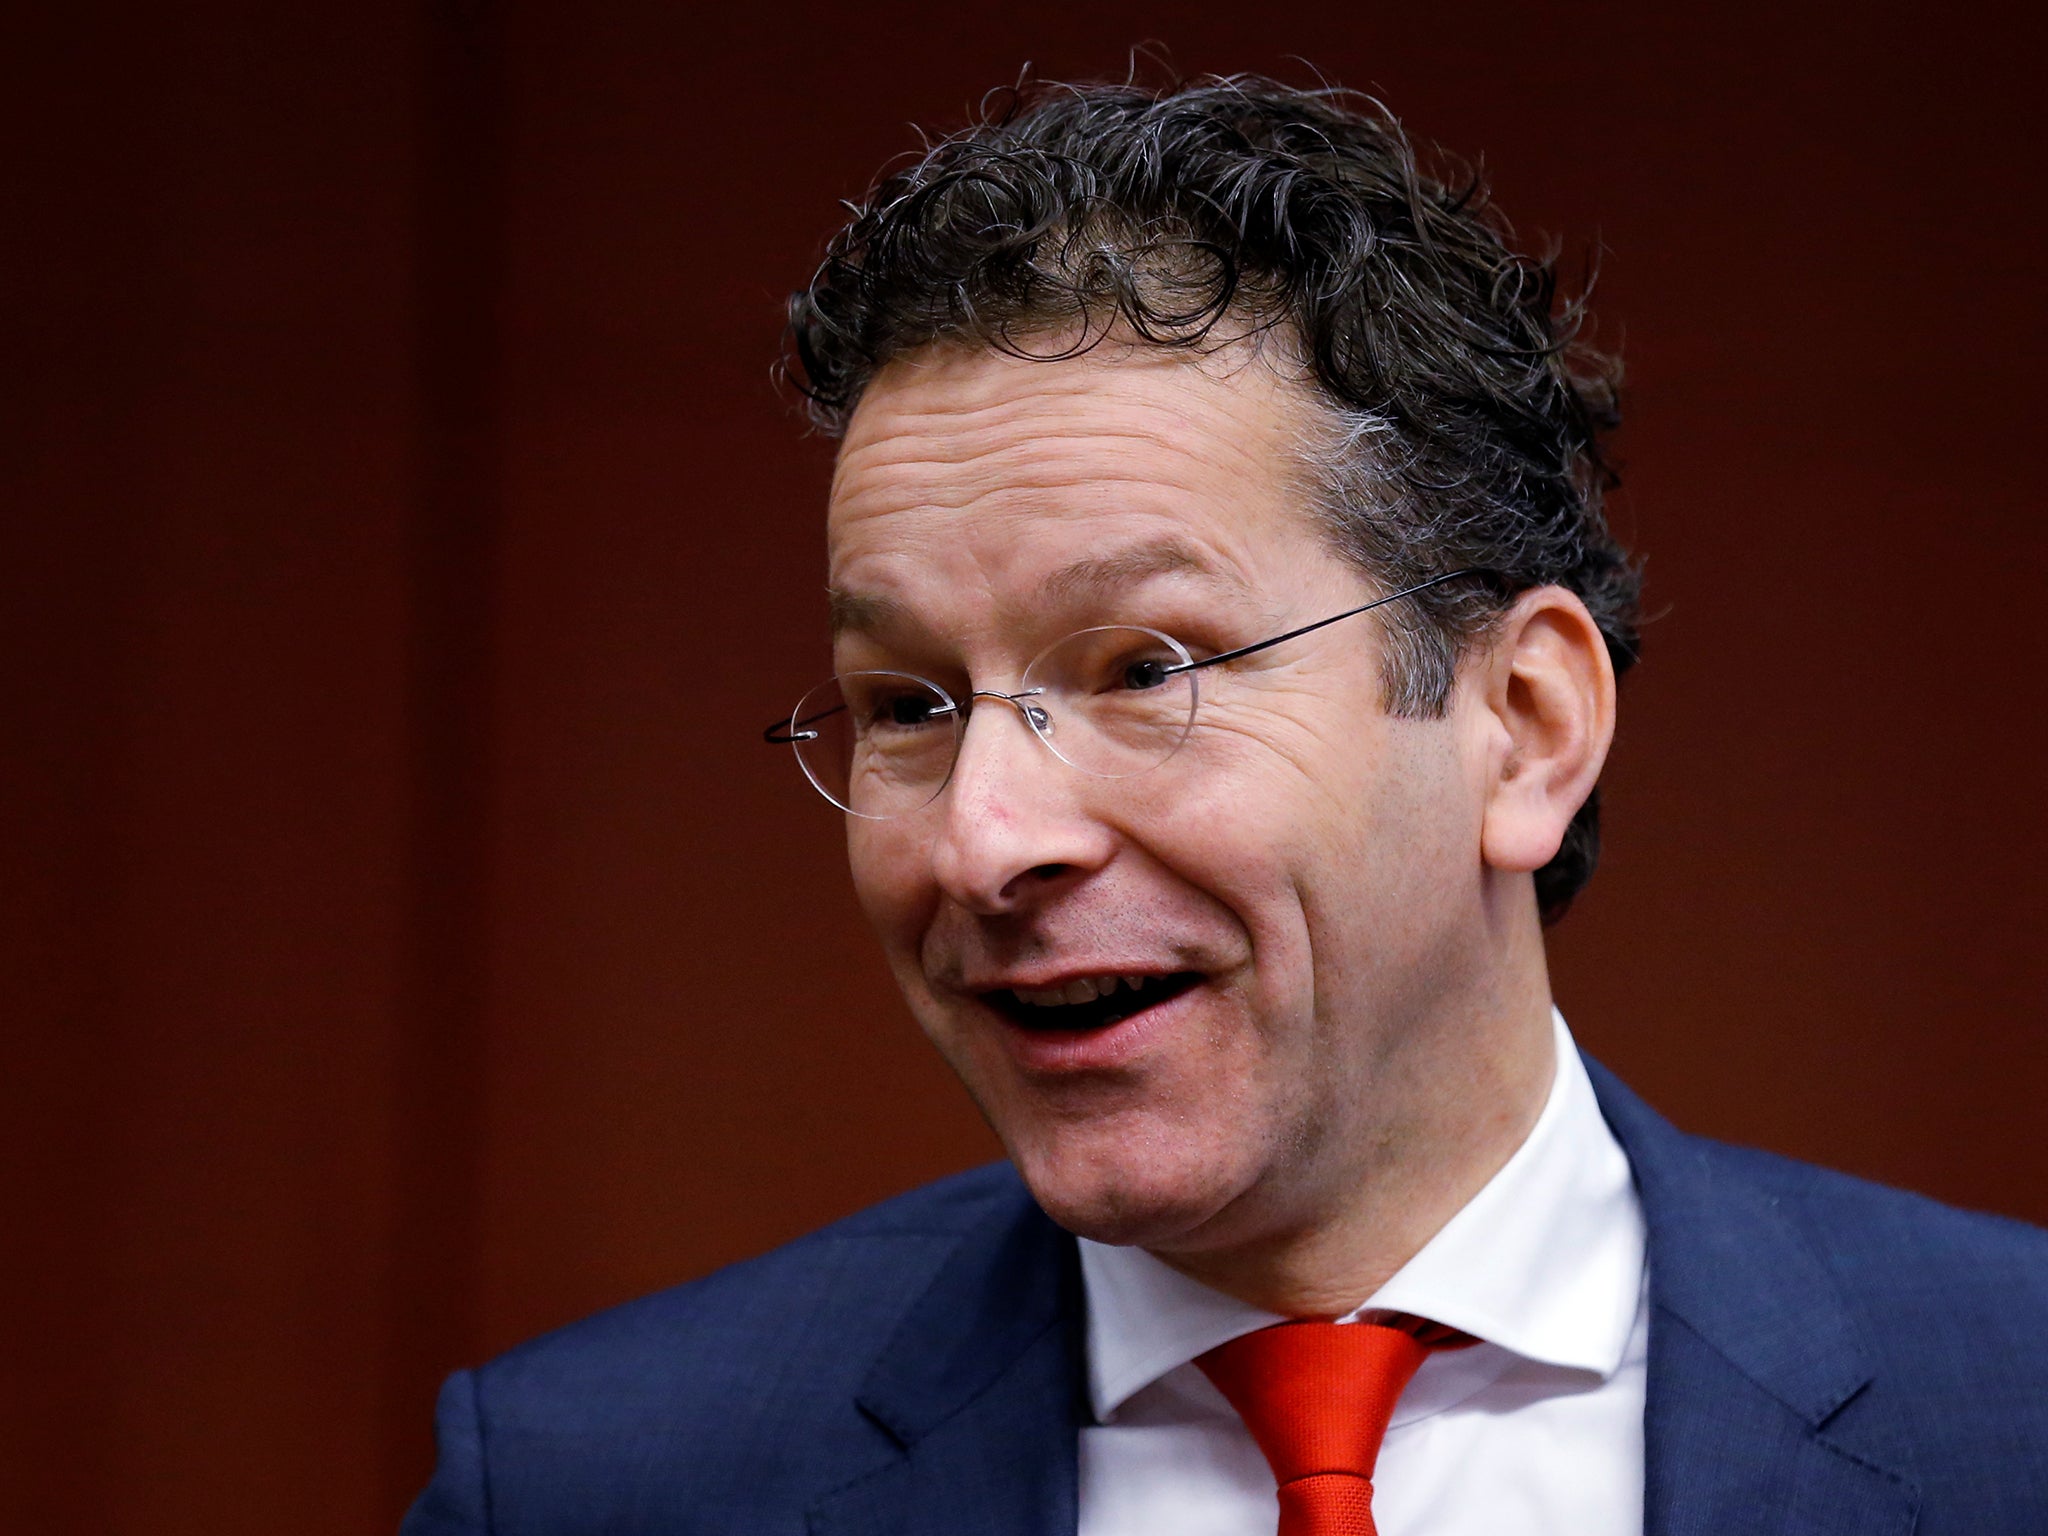 The comments come “from a tough Dutch Calvinistic culture, with Dutch directness,” Dijsselbloem said in the Hague on Wednesday